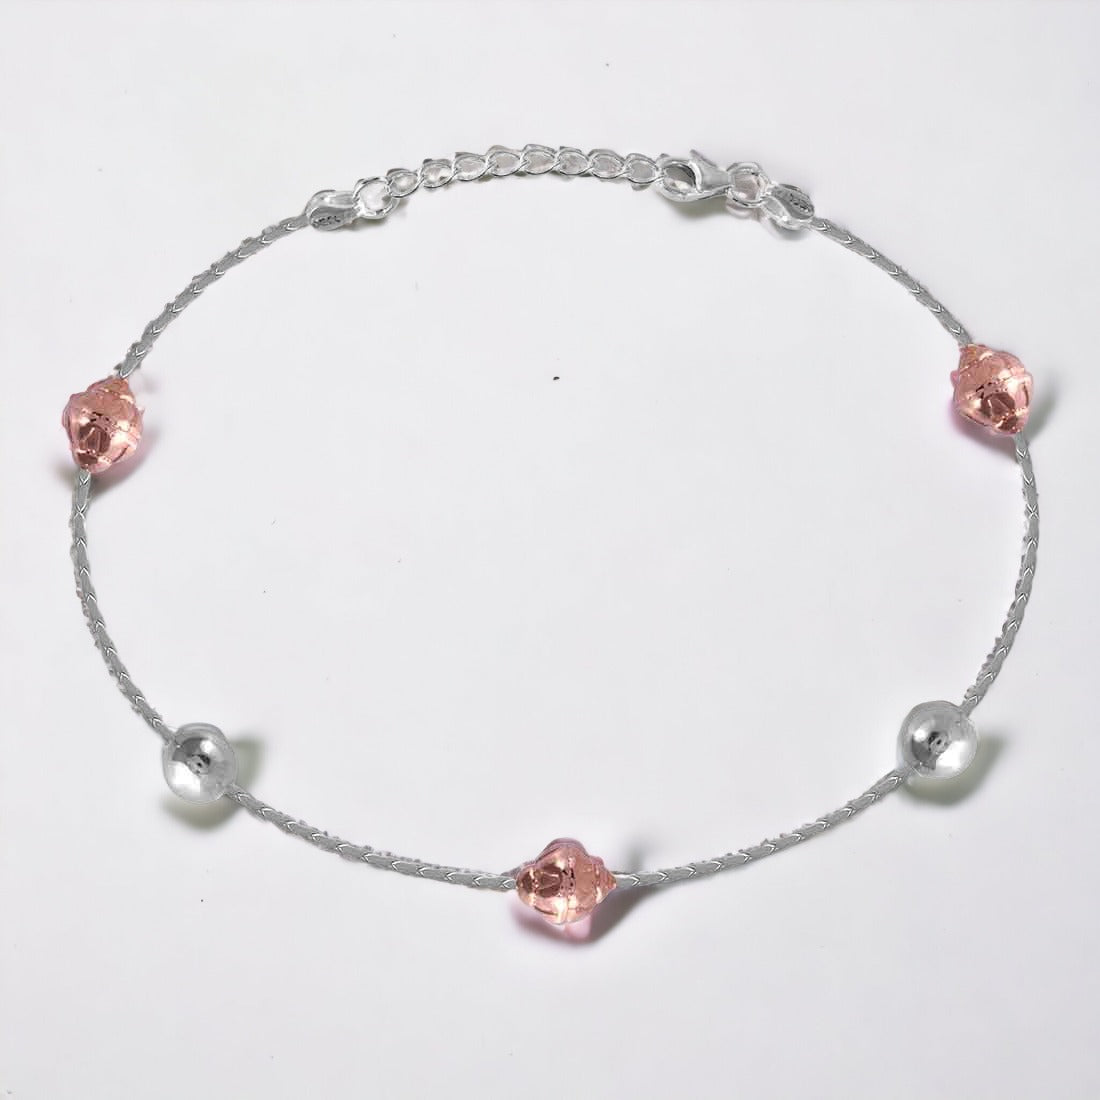 Anklet With Rosegold Balls For Women & Girls